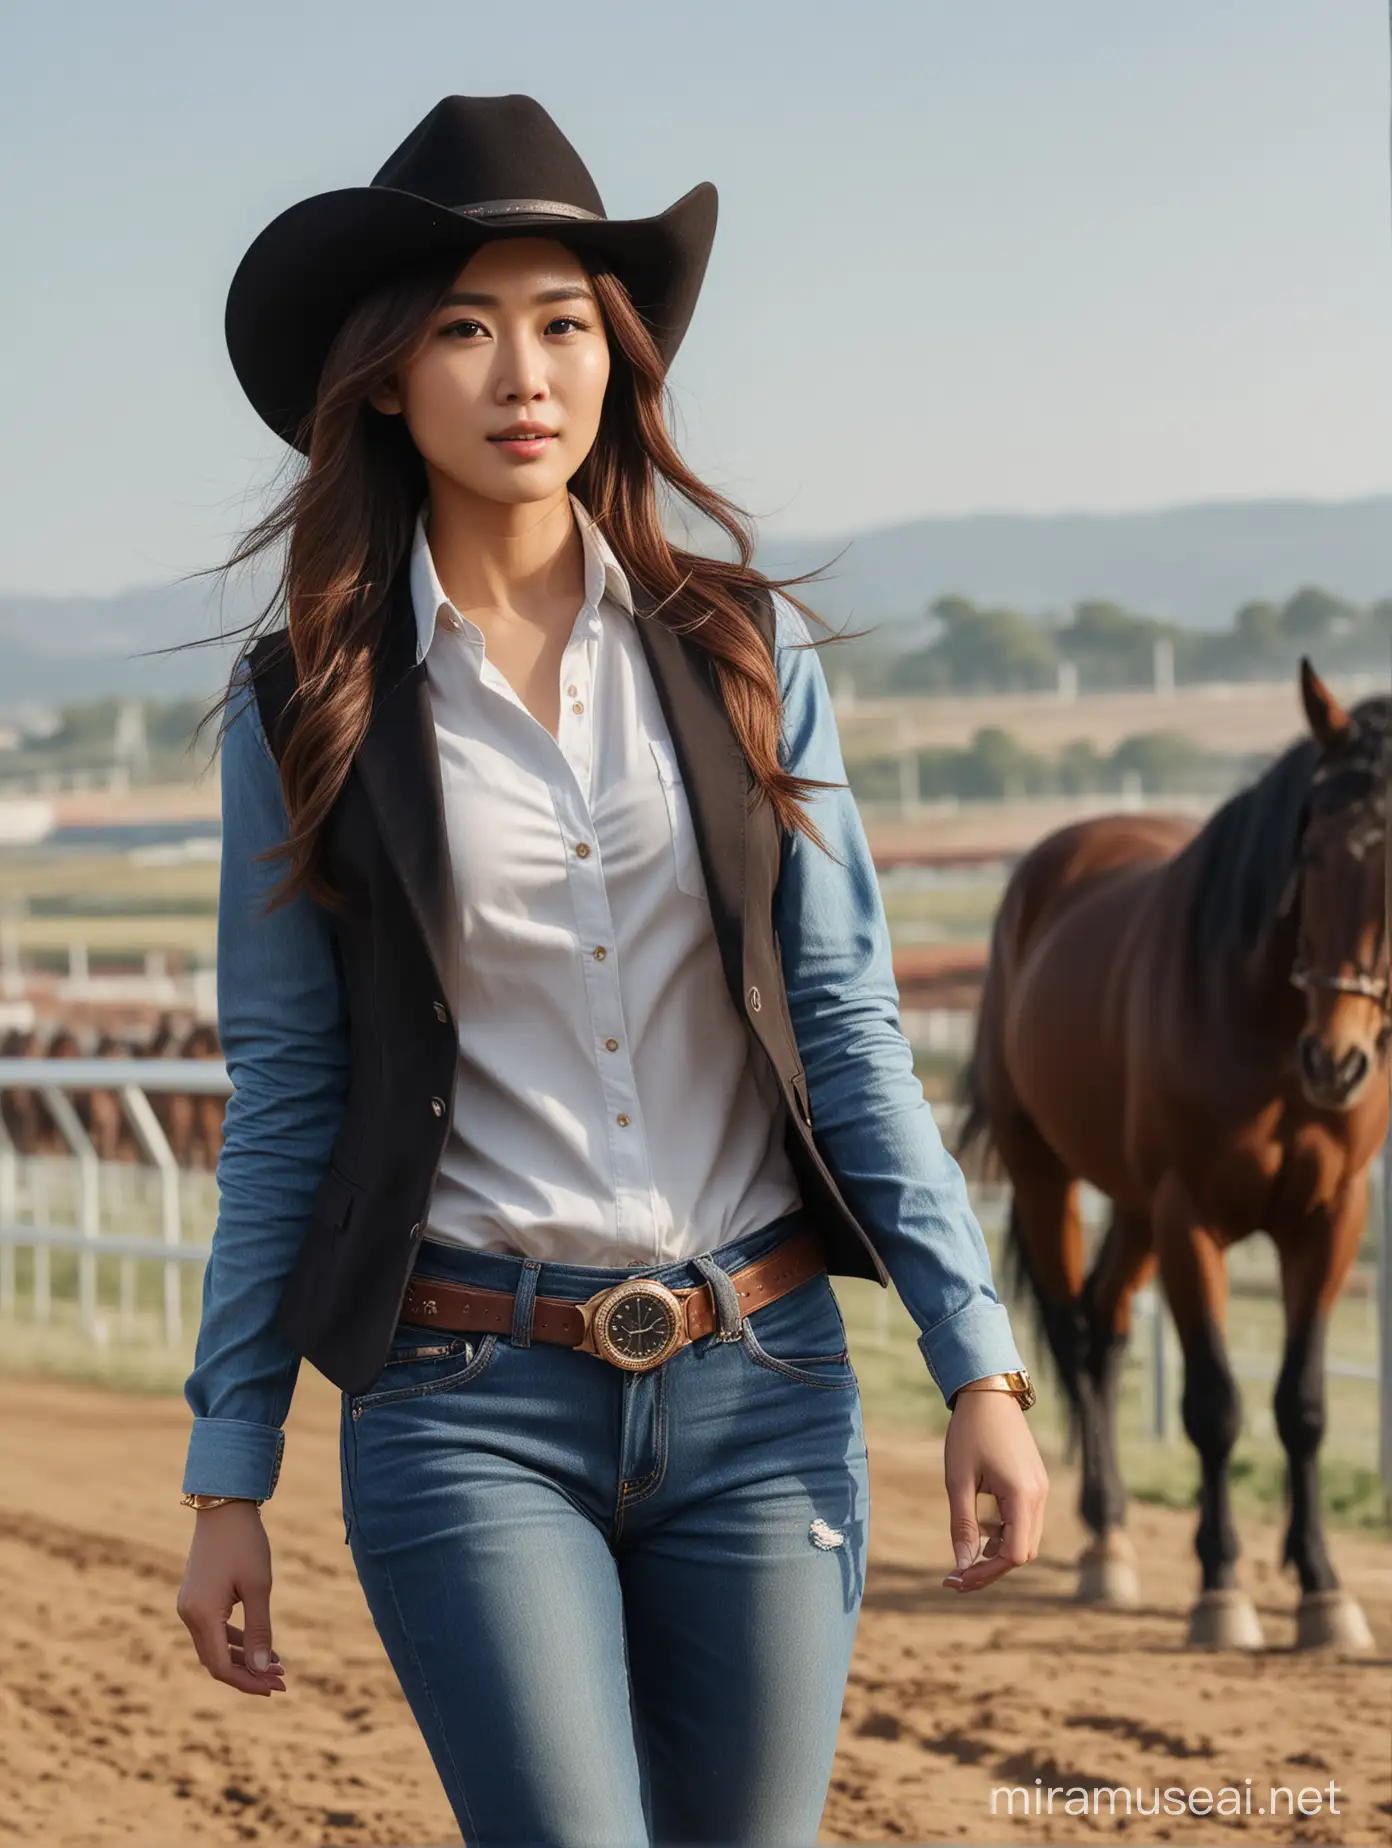 HD PIC, ULTRA REALISTIC, REAL PIC, 8K  real pic, HD pic, 8K  35 year old Asian woman, brown hair, brown cowboy hat, gold watch, wearing a black long-sleeved shirt, brown vest, blue jeans, brown boots, walking with a black horse,  set on a horse racing track, Tanah Merah  hd pic, realistic, 8K, ultra realistic